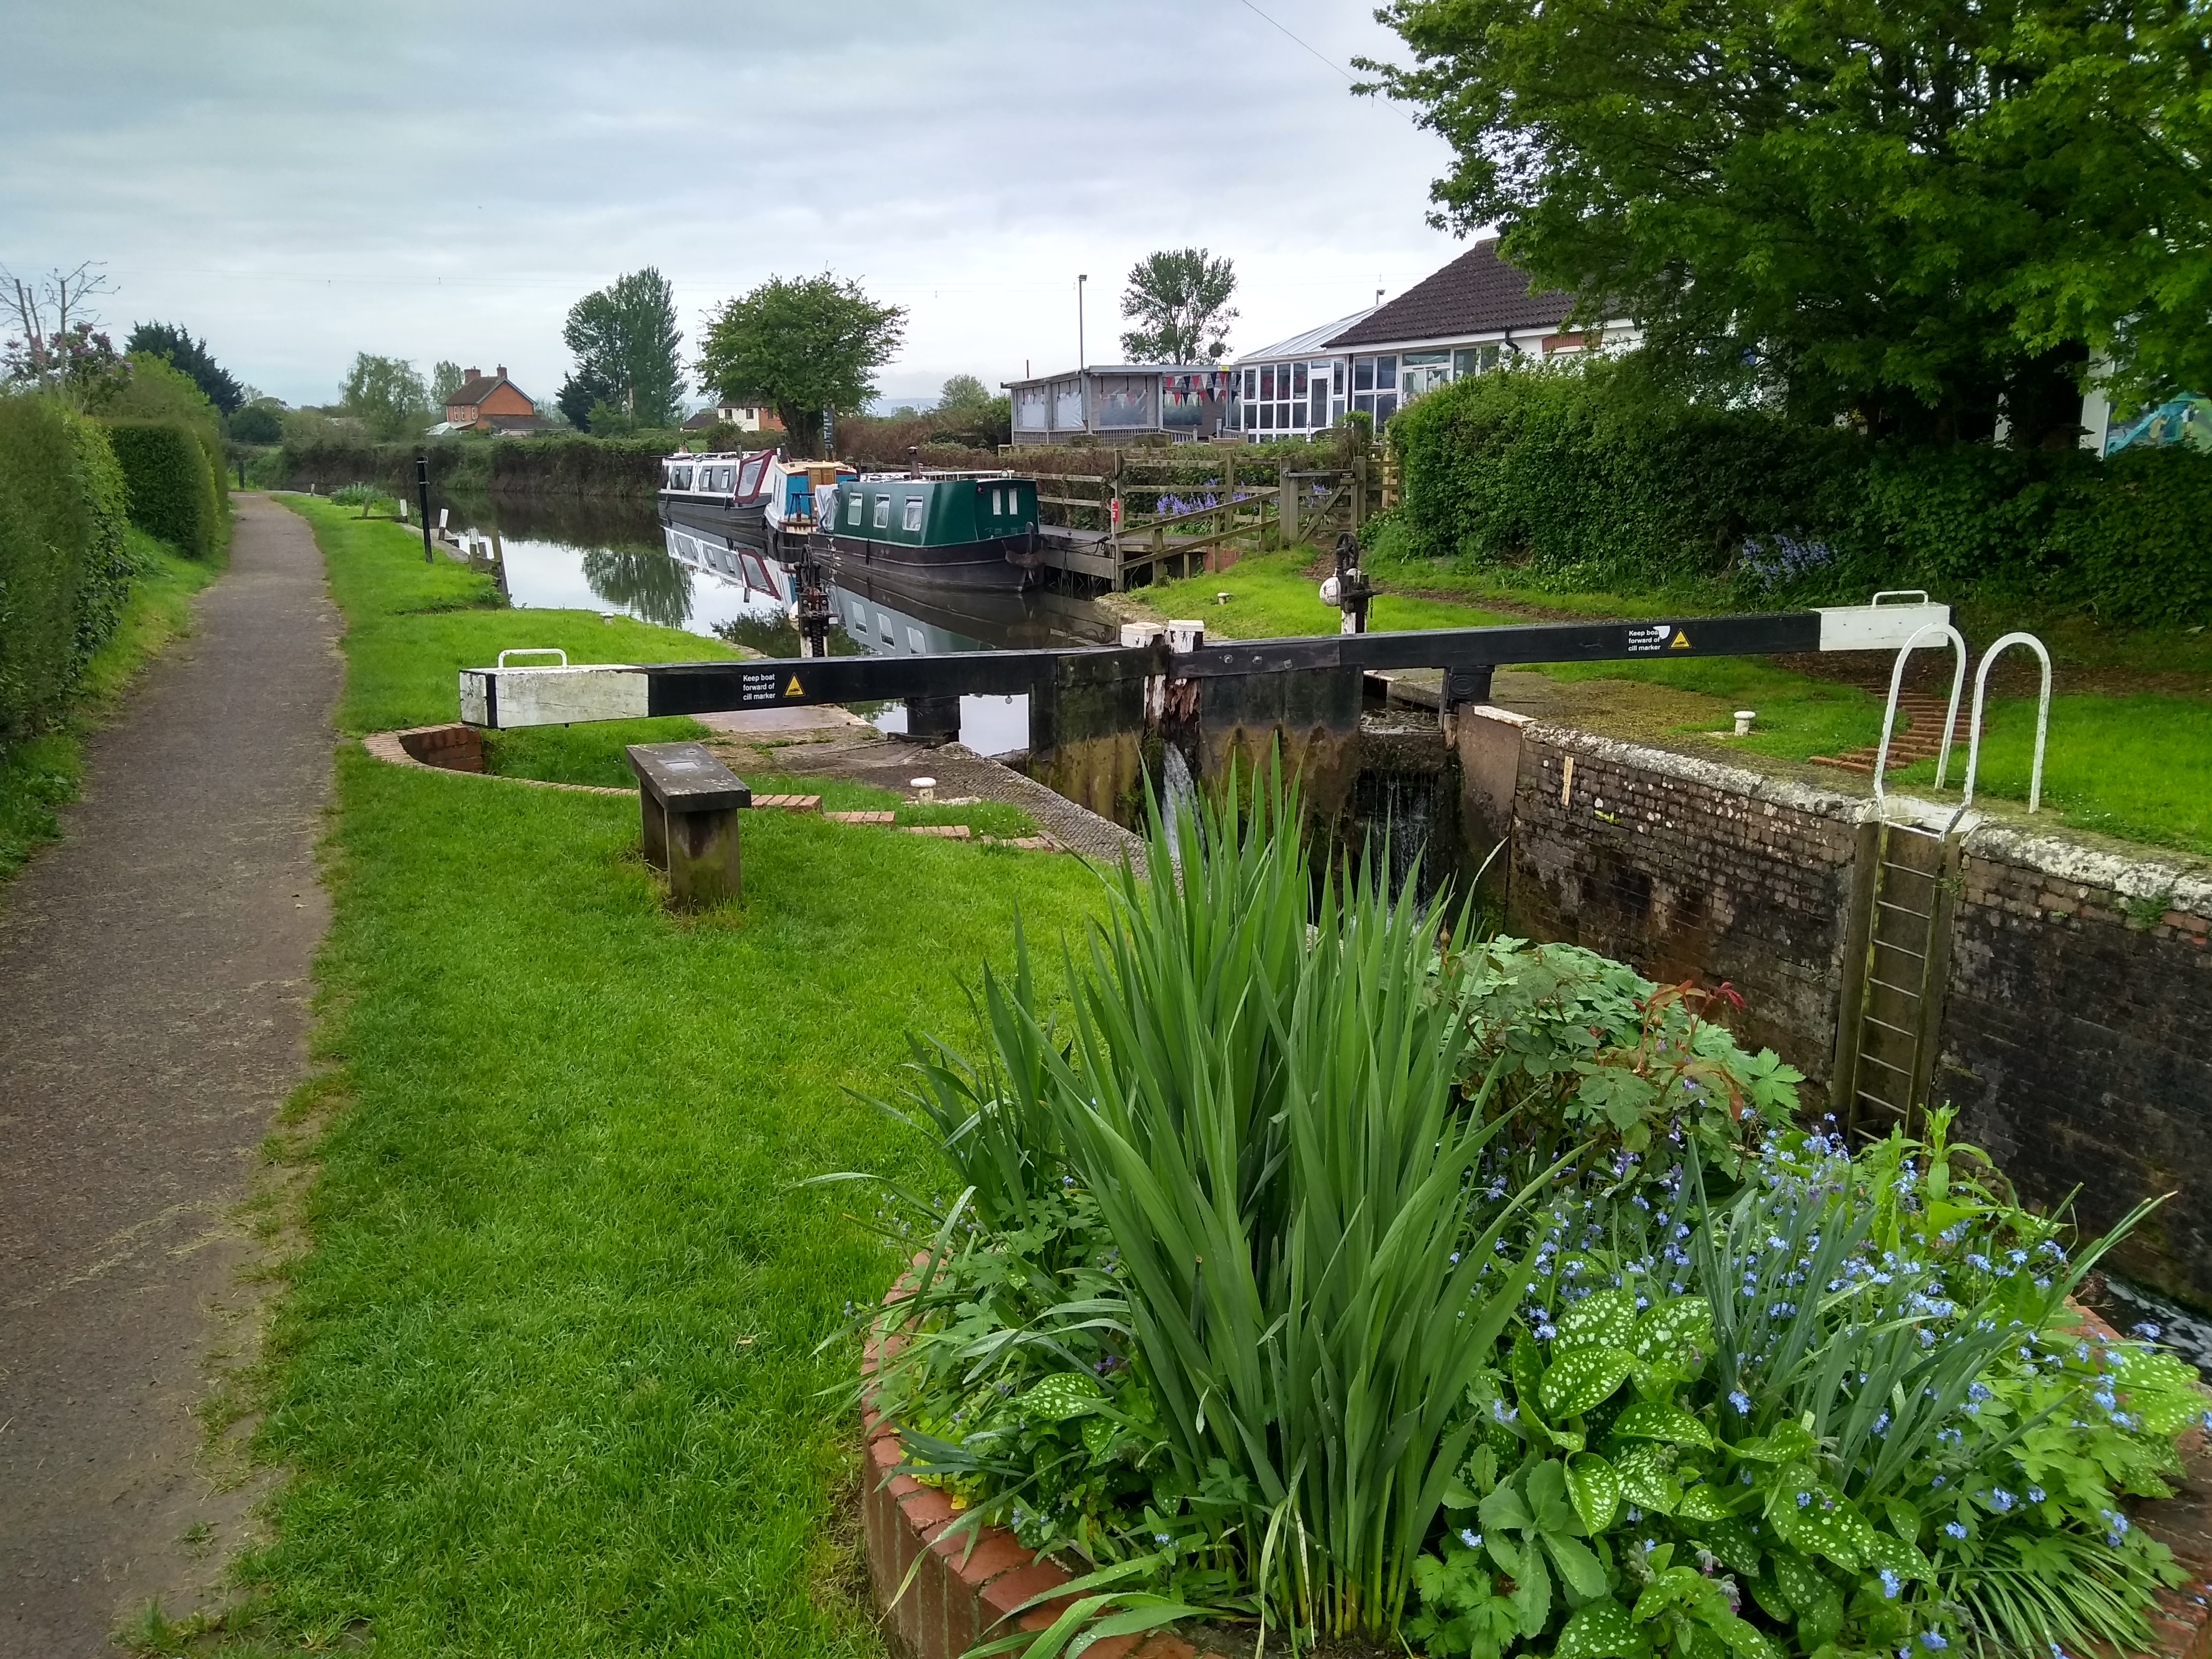 Canal lock with narrowboats in the background